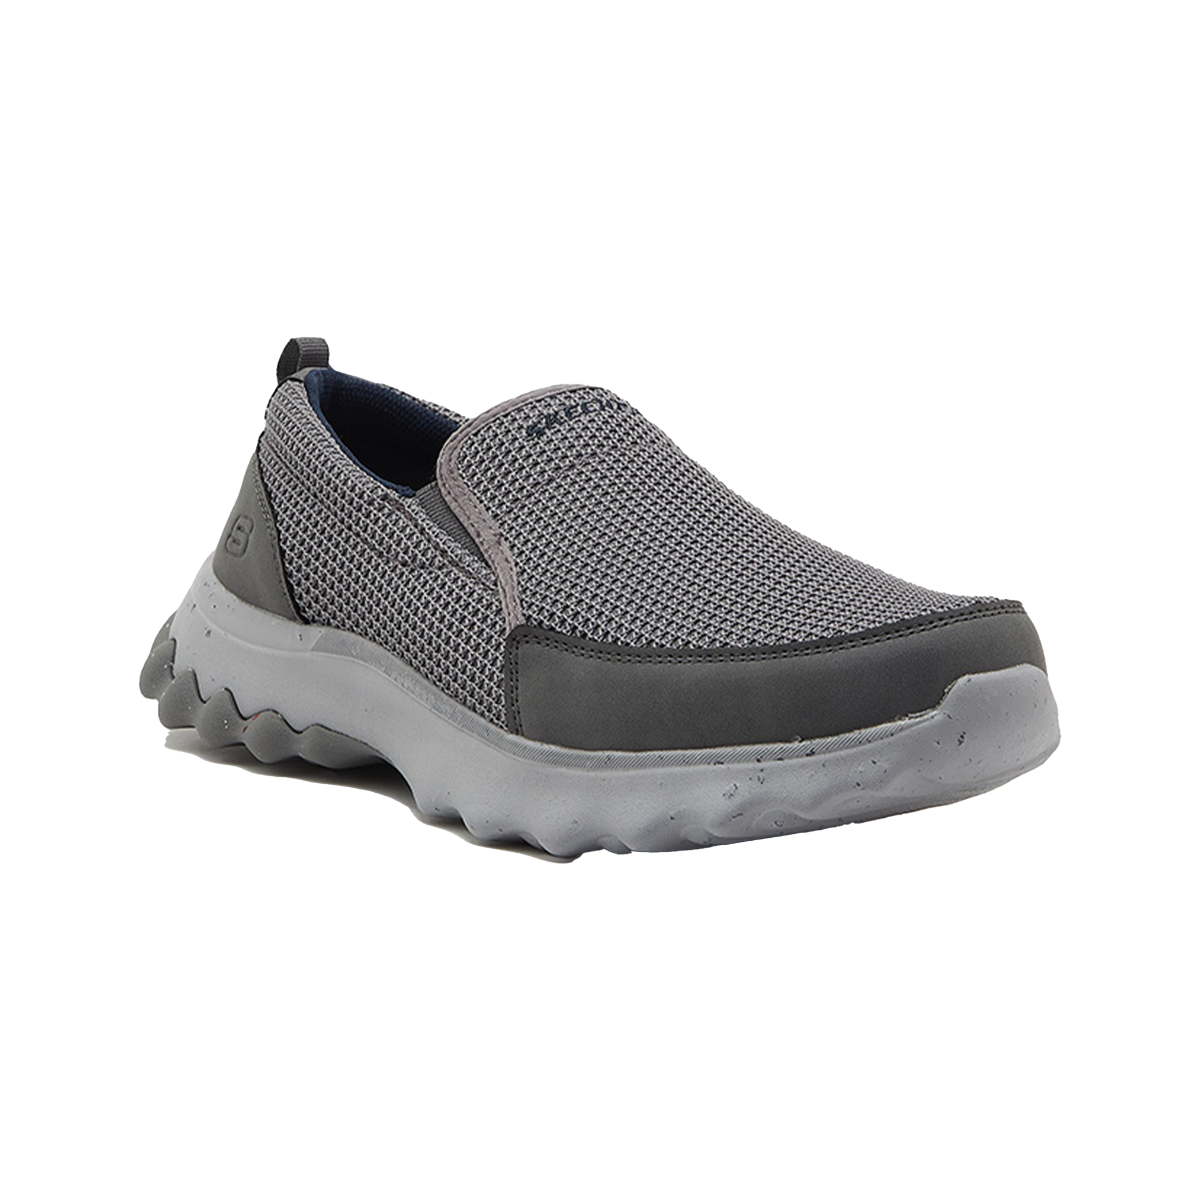 Skechers Voston Lifestyle Shoes For Men, Charcoal